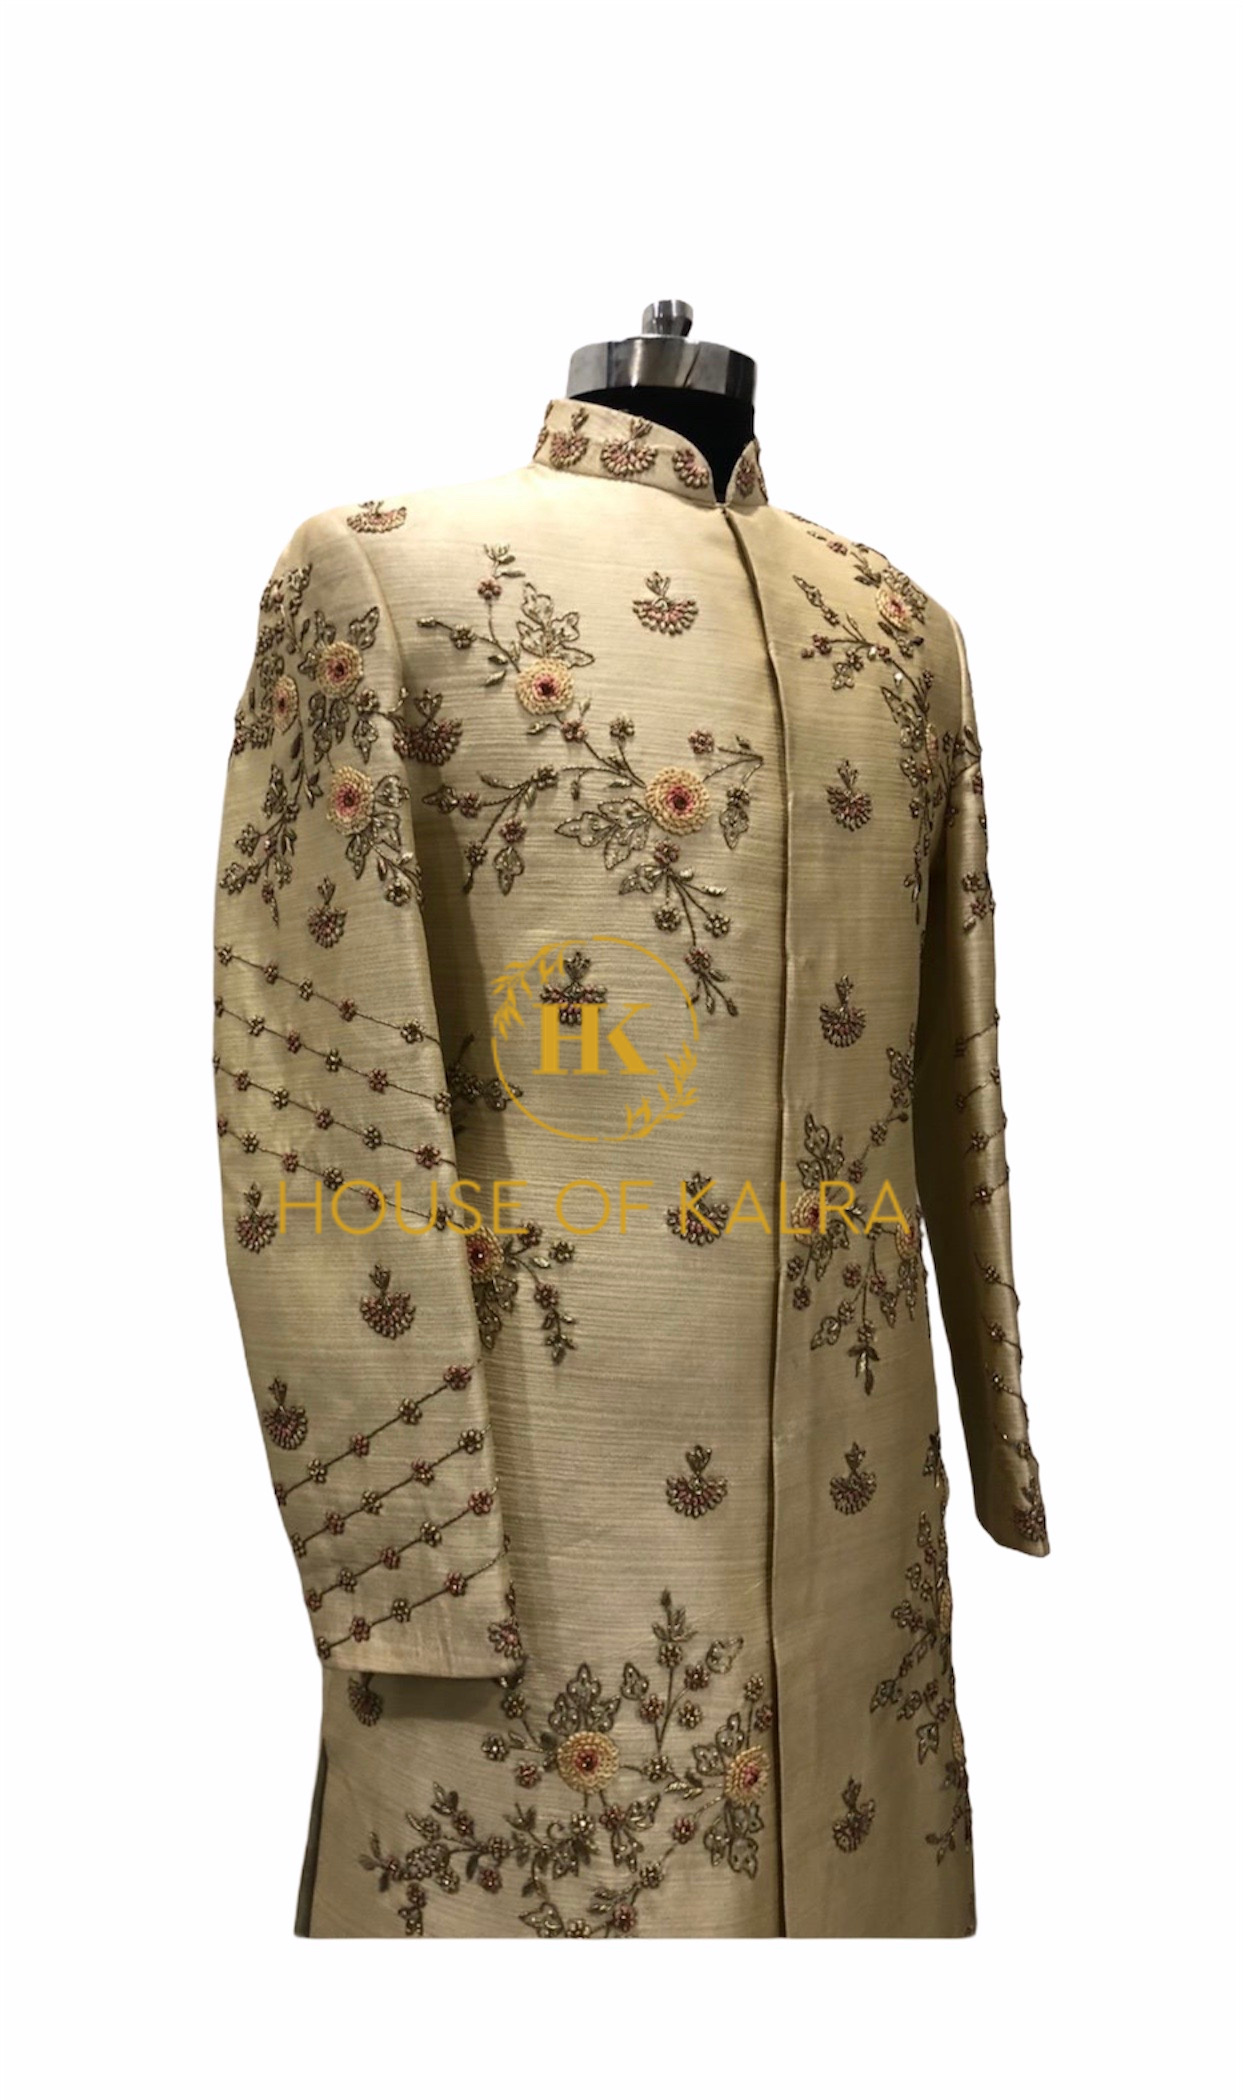 Indian traditional wedding dress for men